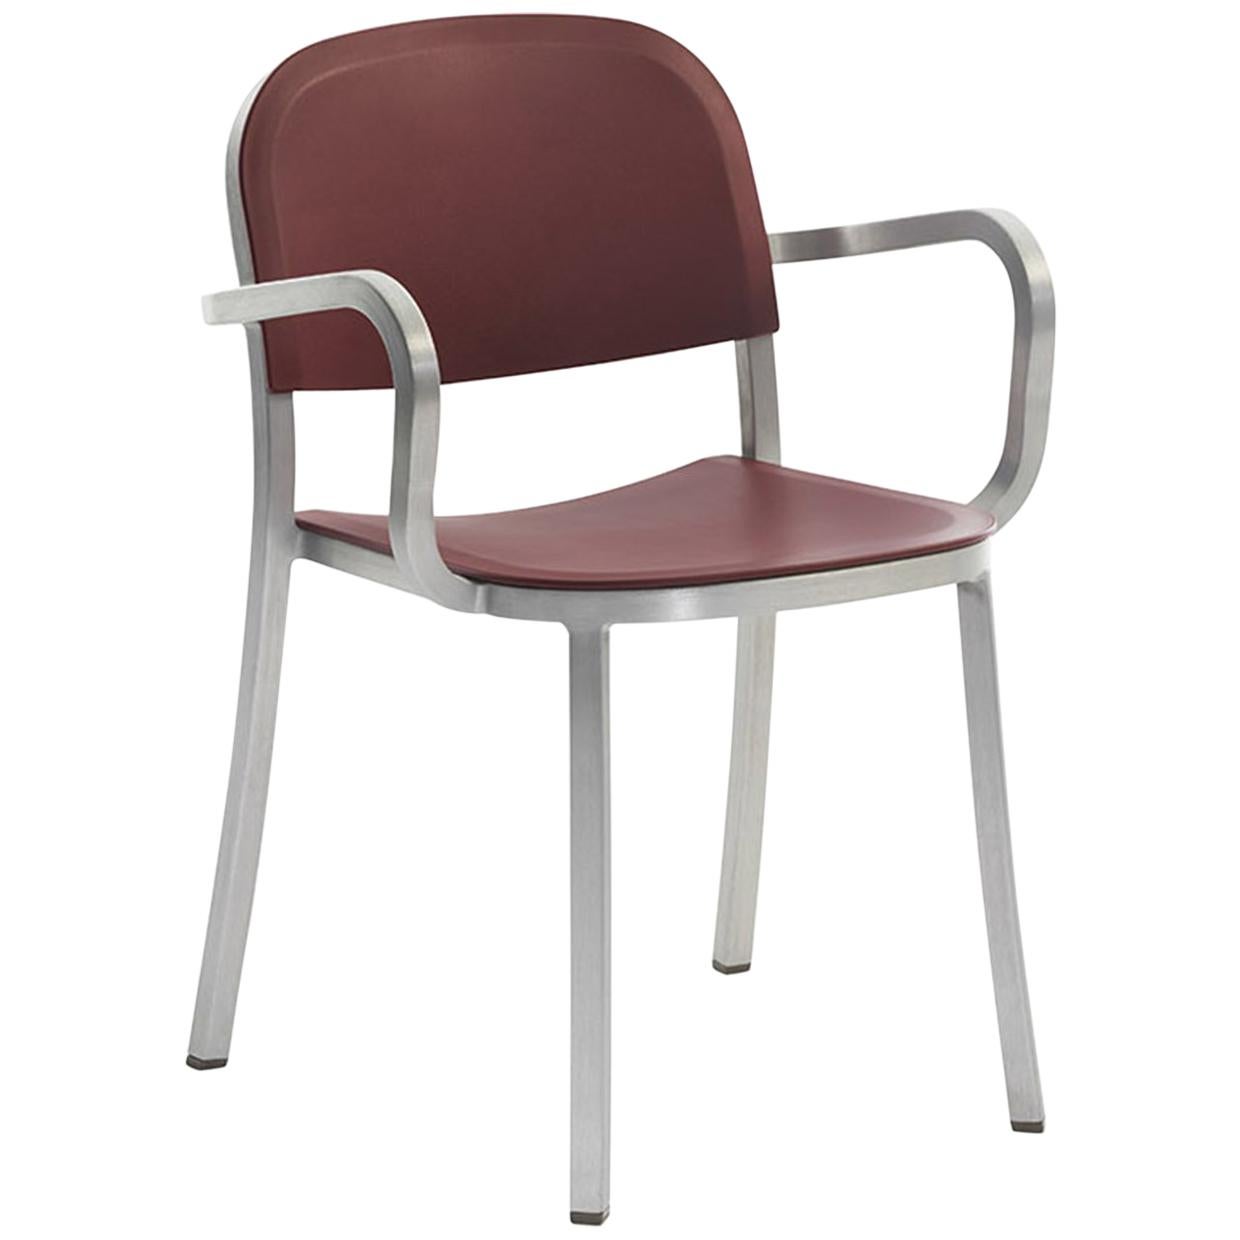 Emeco 1 Inch Armchair in Brushed Aluminum and Bordeaux by Jasper Morrison